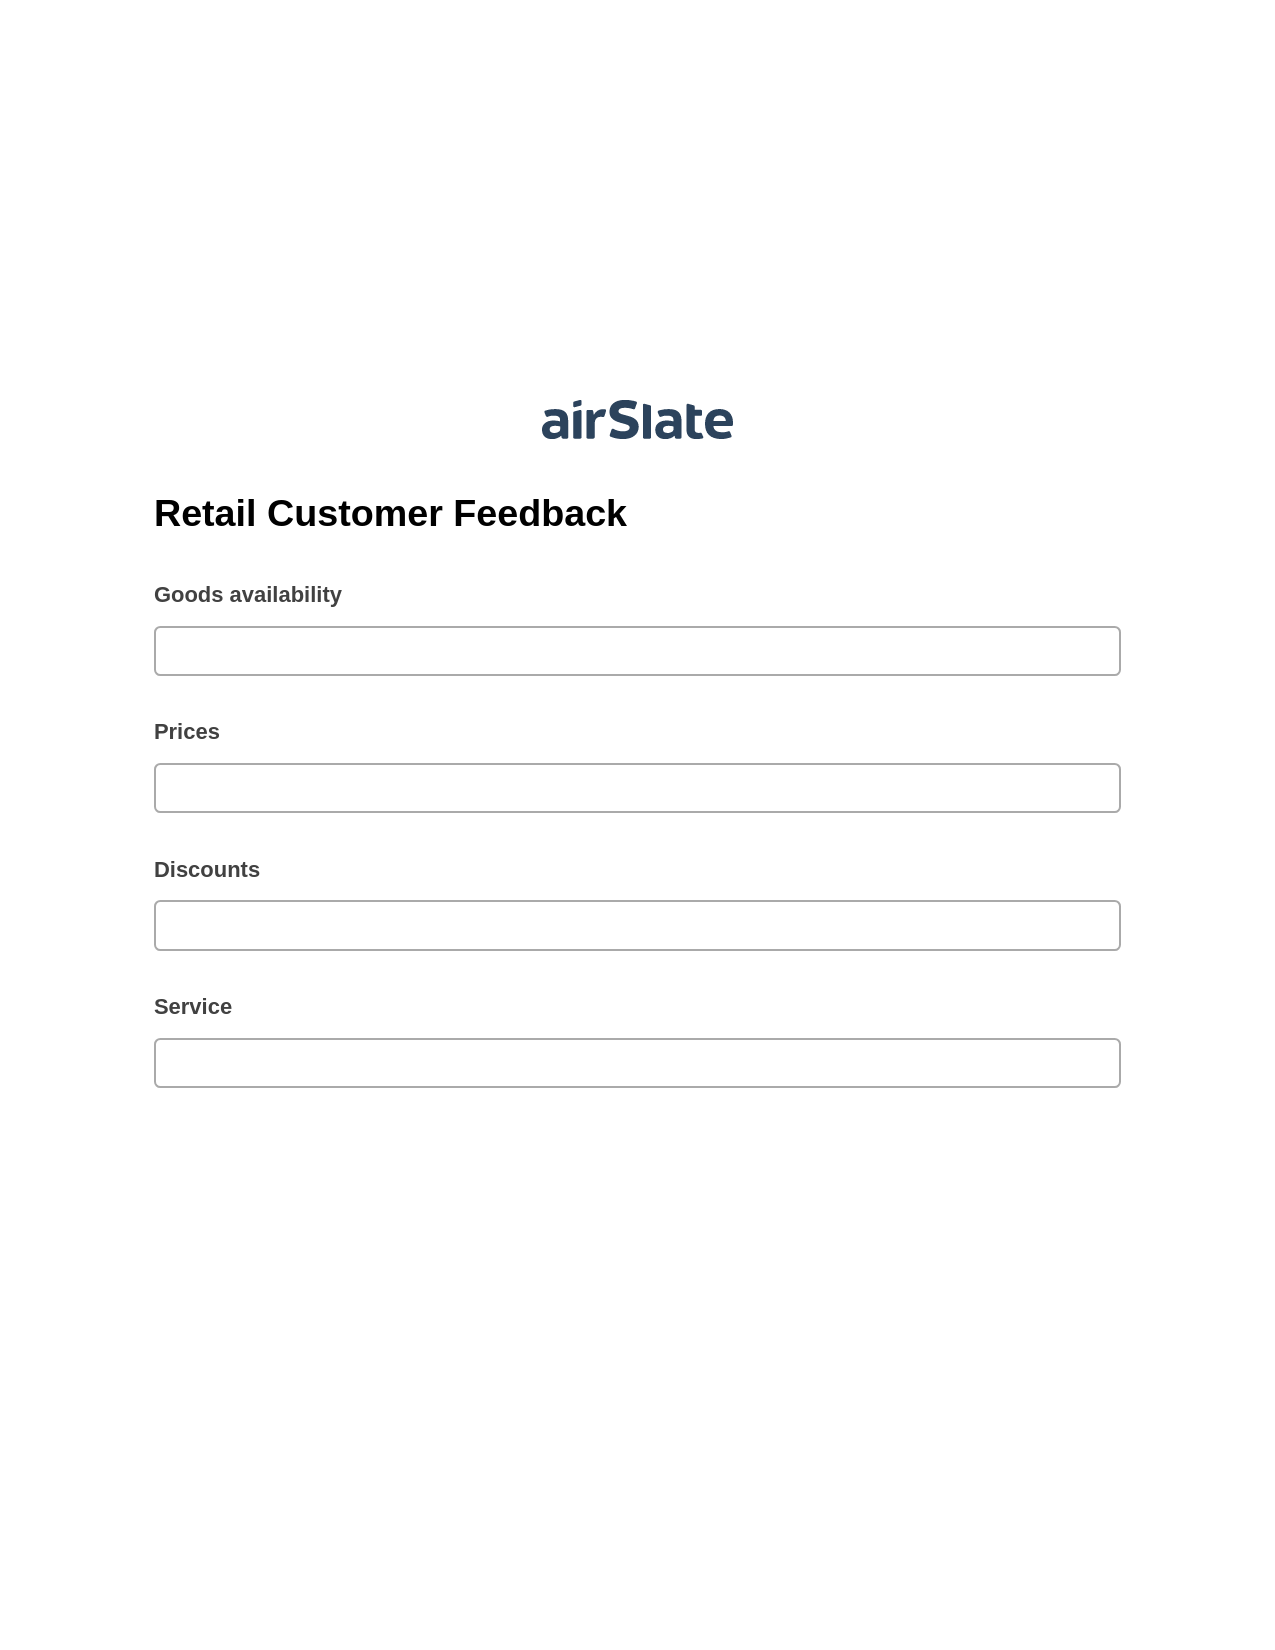 Multirole Retail Customer Feedback Pre-fill from CSV File Bot, Slack Notification Bot, Export to NetSuite Record Bot